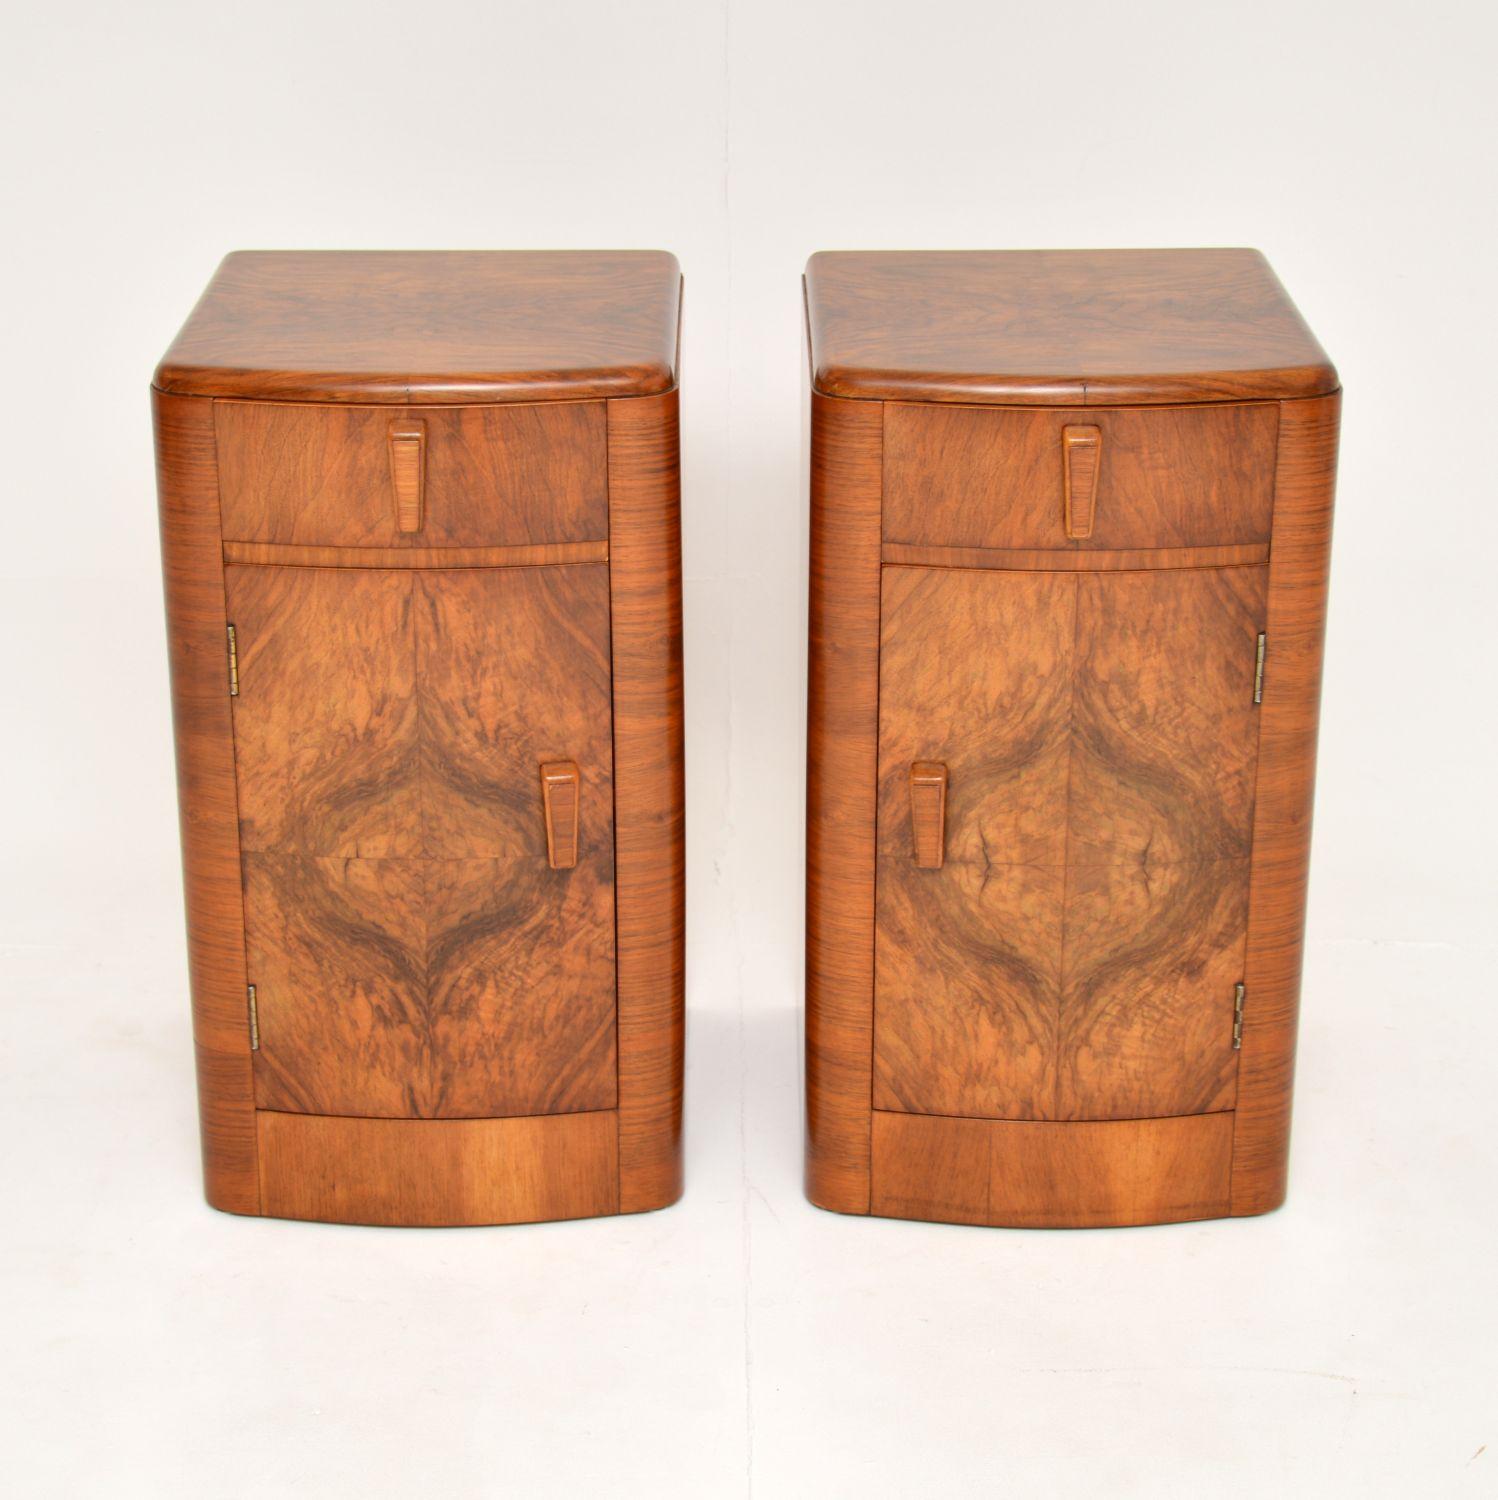 A beautifully made pair of original Art Deco period bedside cabinets. They were made in England, they date from the 1930’s.

Made from richly figured walnut, the colour and grain patterns are stunning. They are a very useful size and offer ample